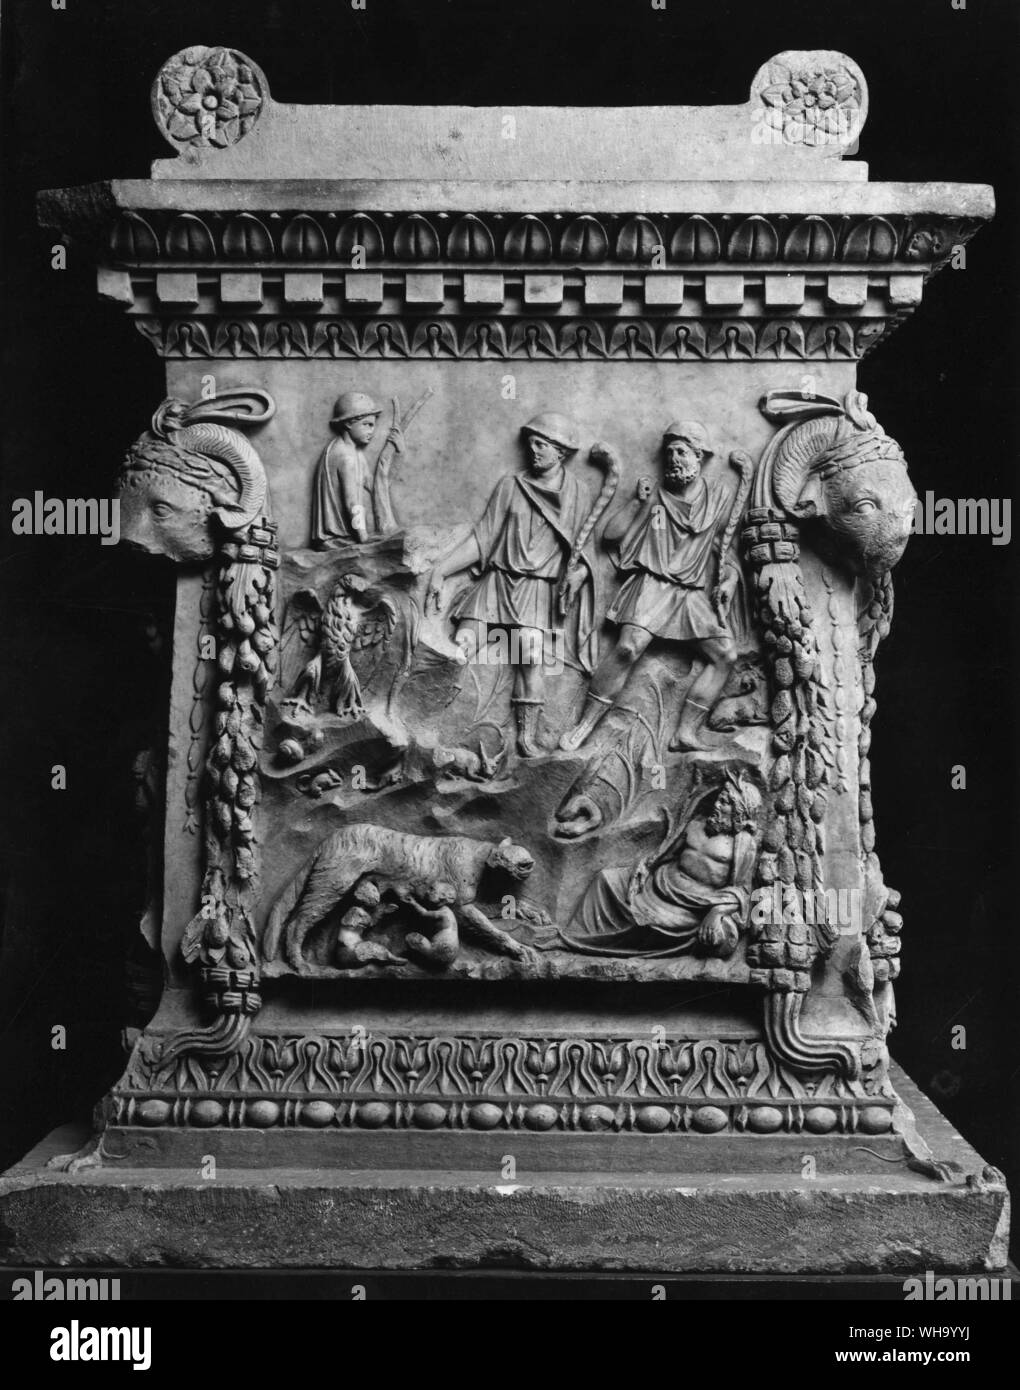 Tomb from Ostia shwoing Romulus and Remus, after whom Rome was named. Stock Photo